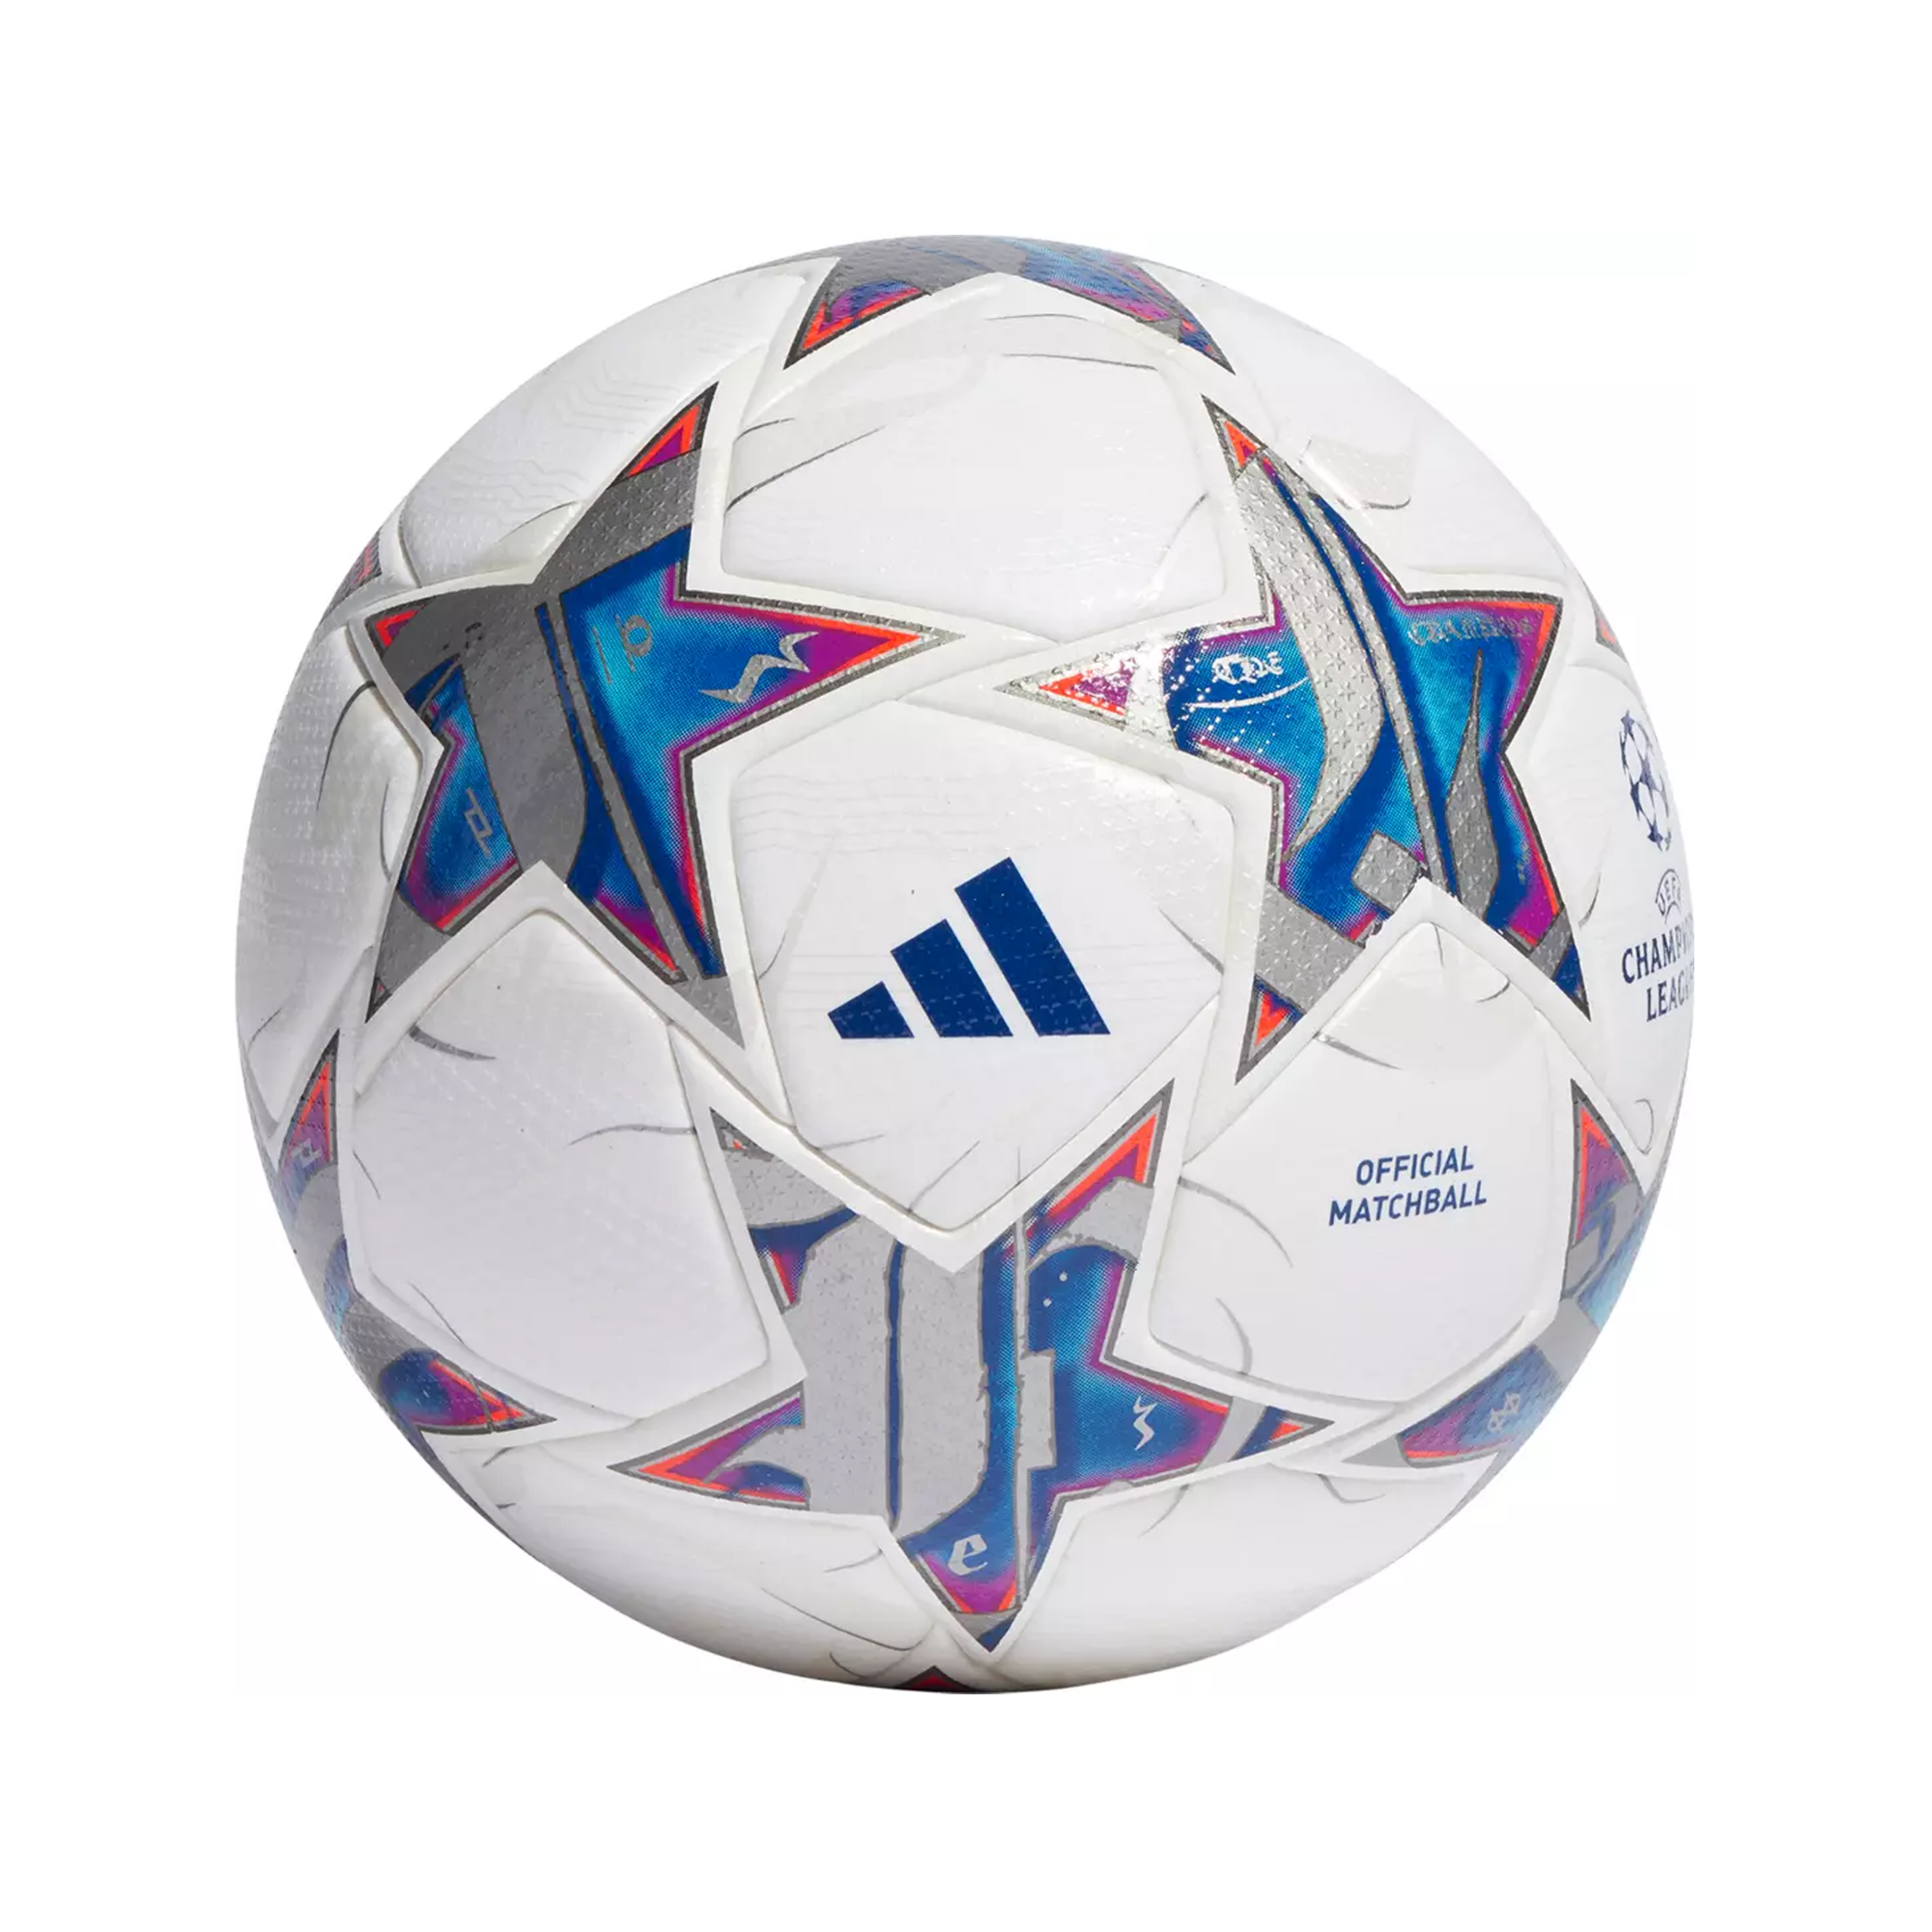 Adidas Brazuca Official Match Ball - White and Blue - Send Gifts